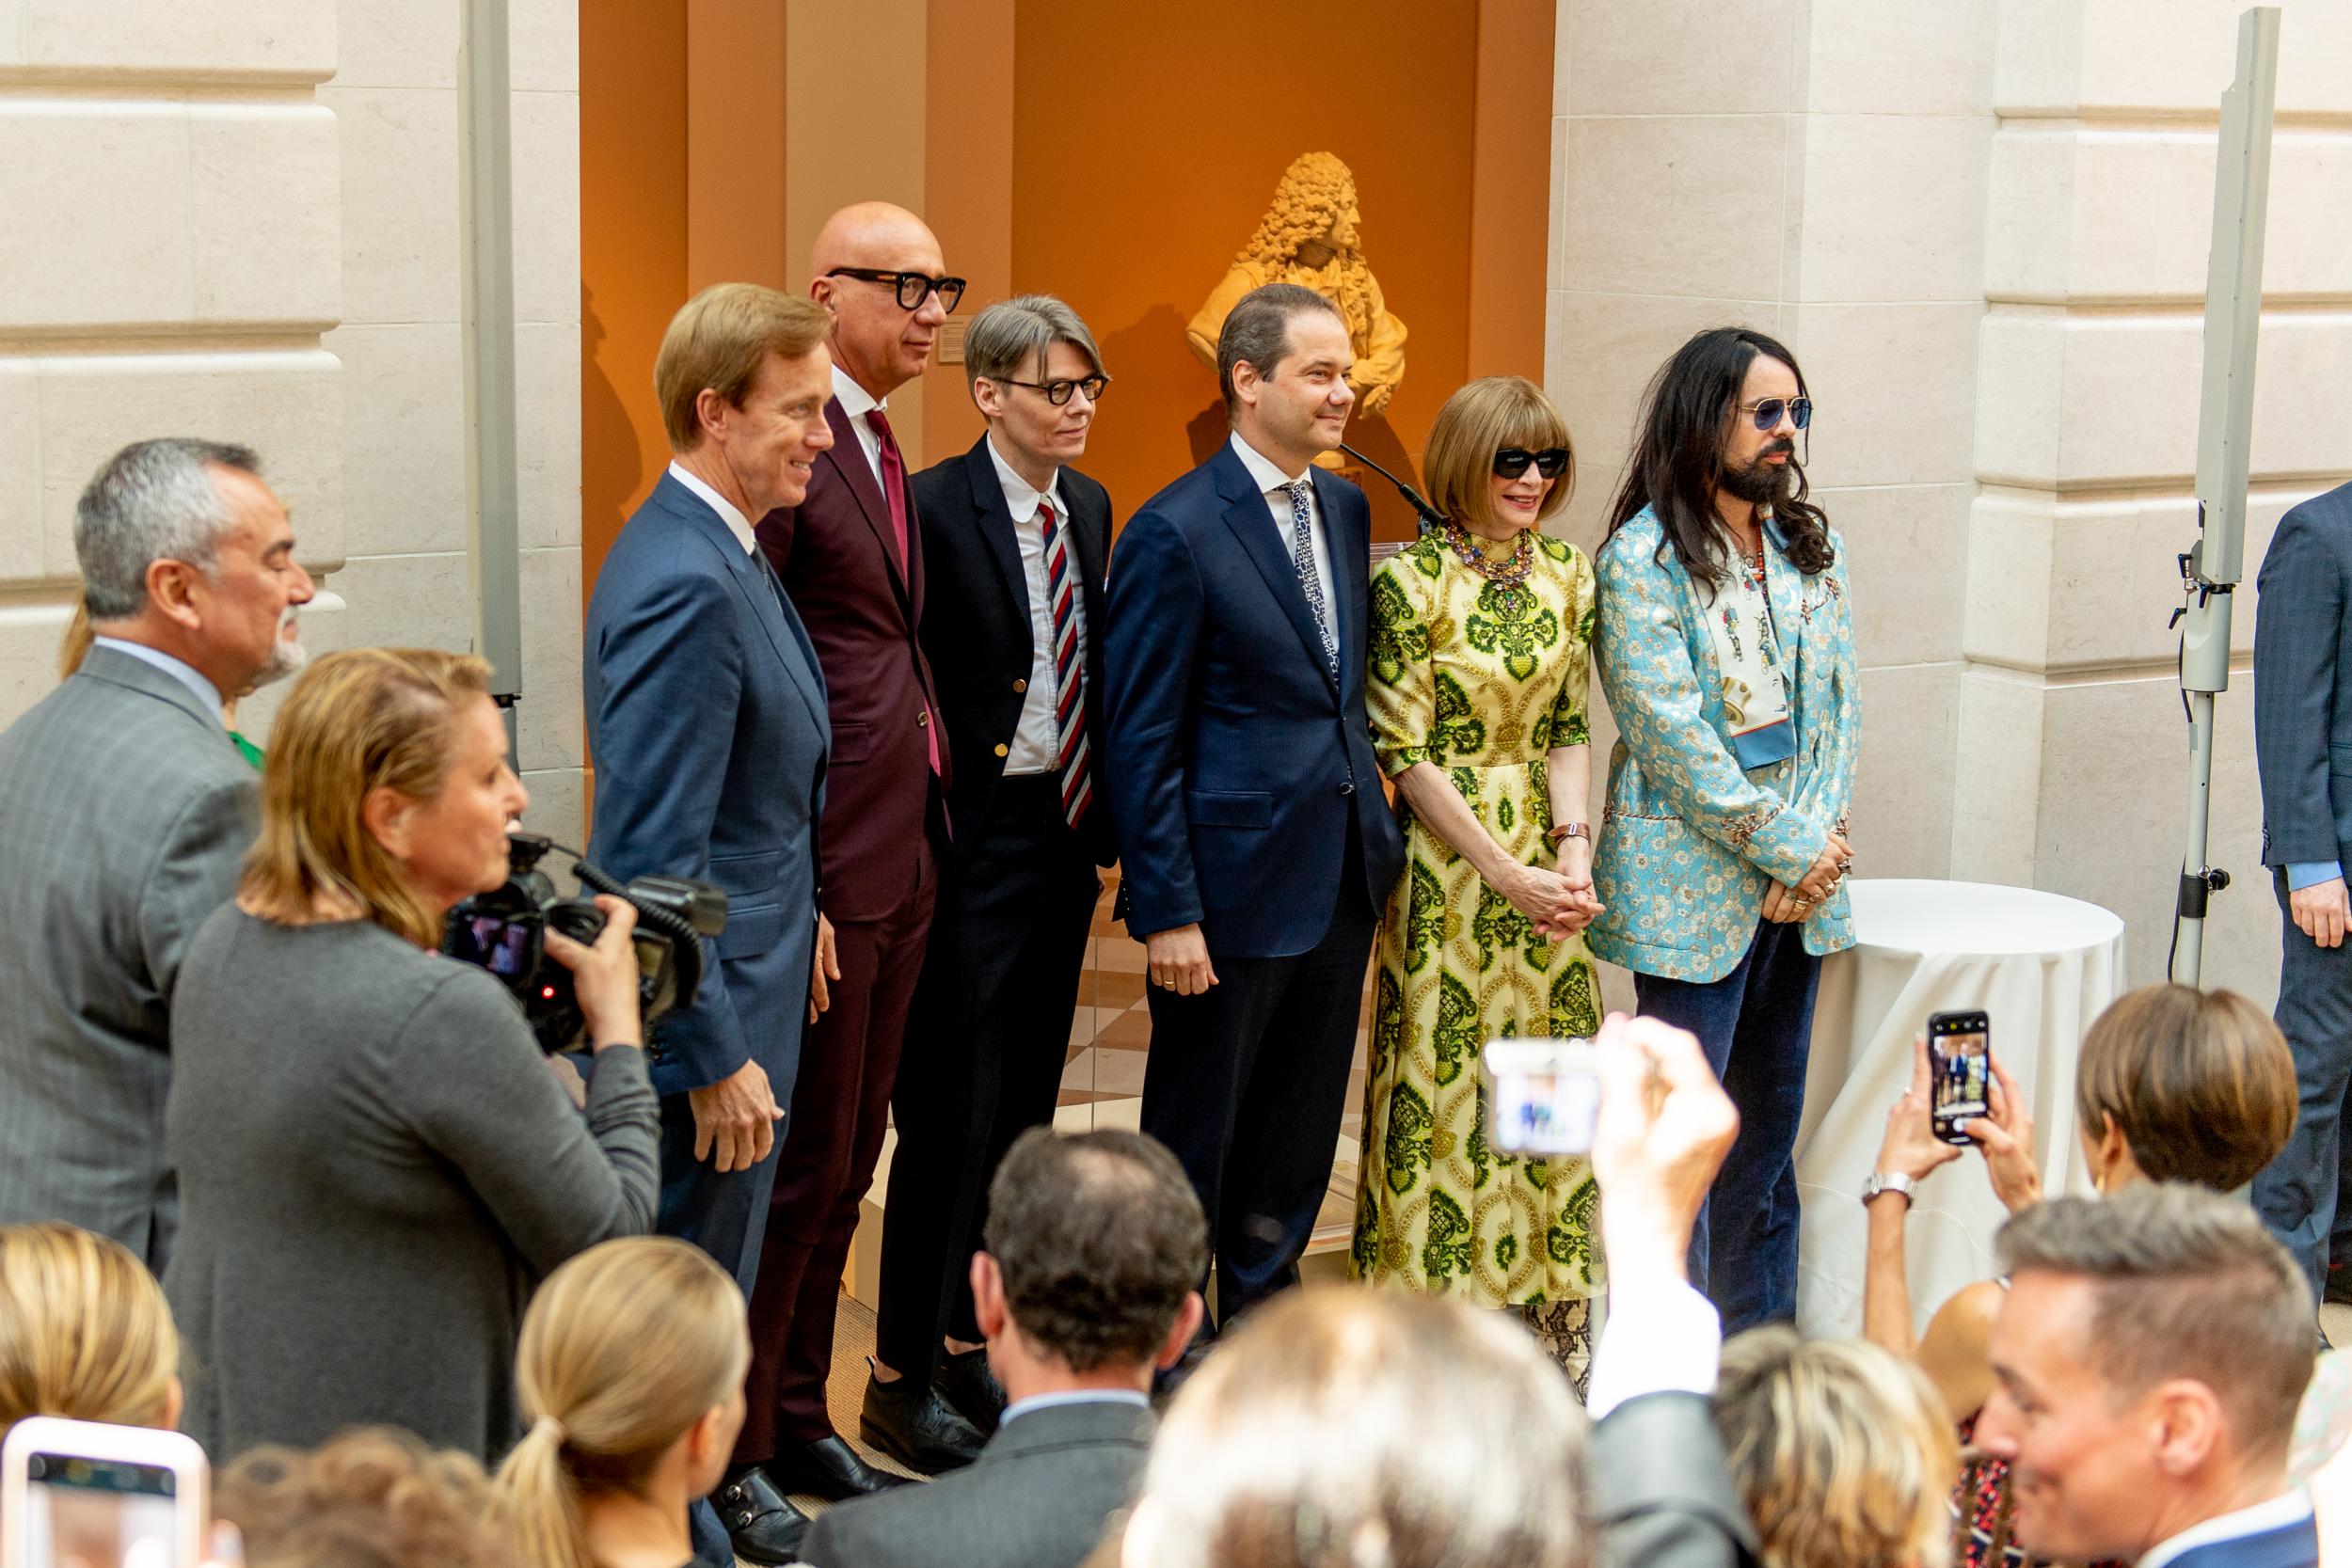 Andrew Bolton, the Costume Institute’s head curator, Anna Wintour, who chairs the Met Gala, and Alessandro Michele, Gucci’s creative director, were all present to introduce the exhibit to the press on Monday, 6 May.